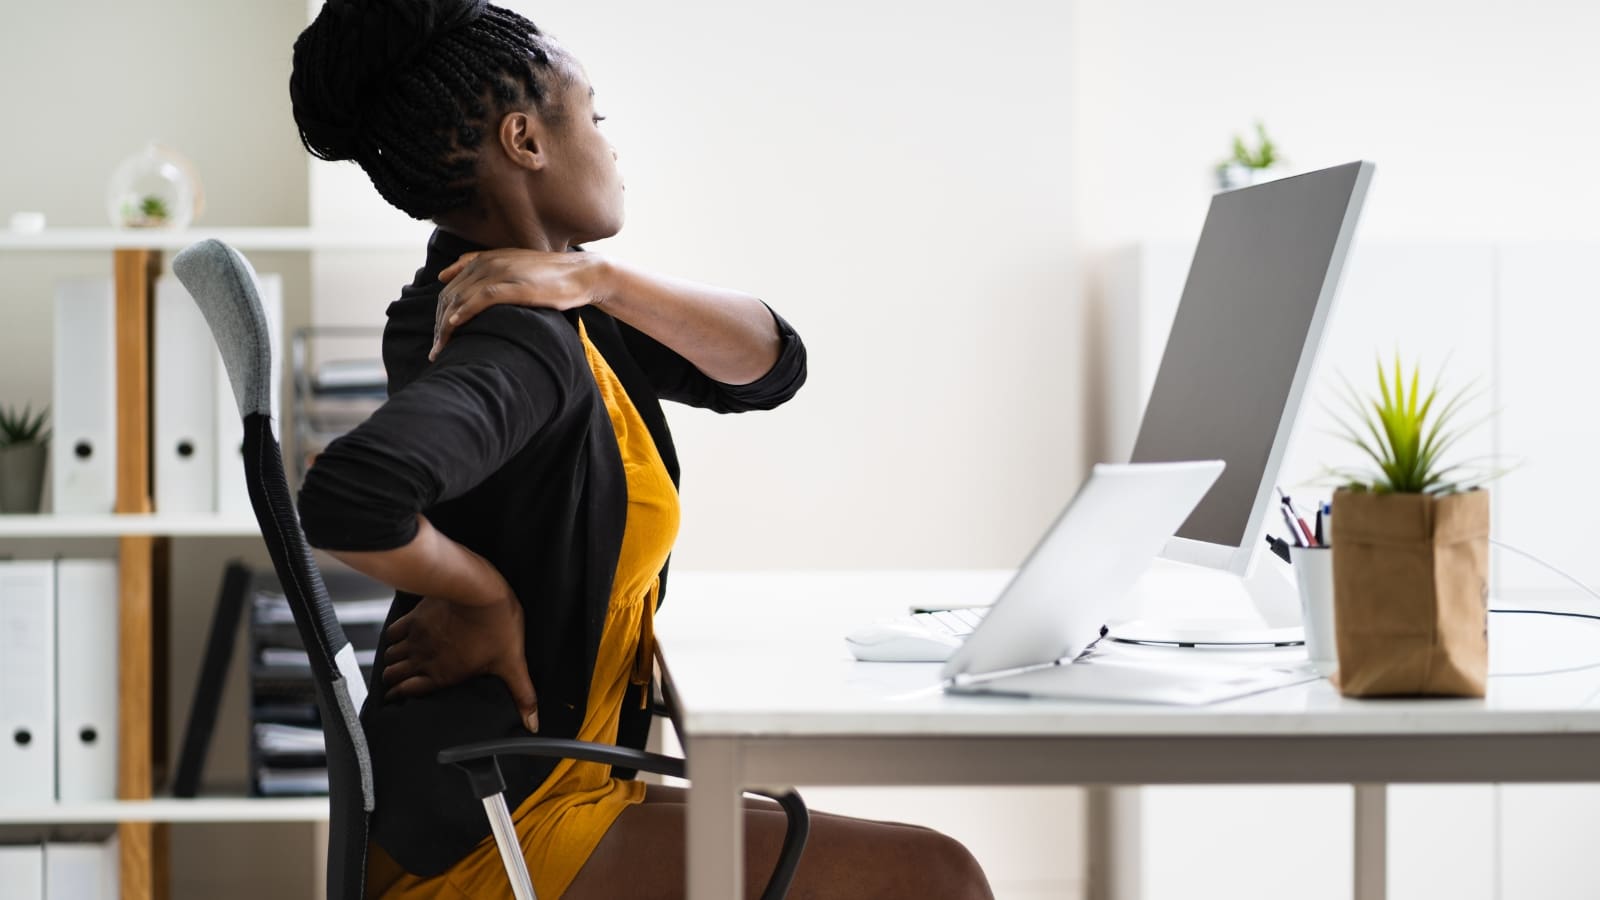 Posture can cause back pain